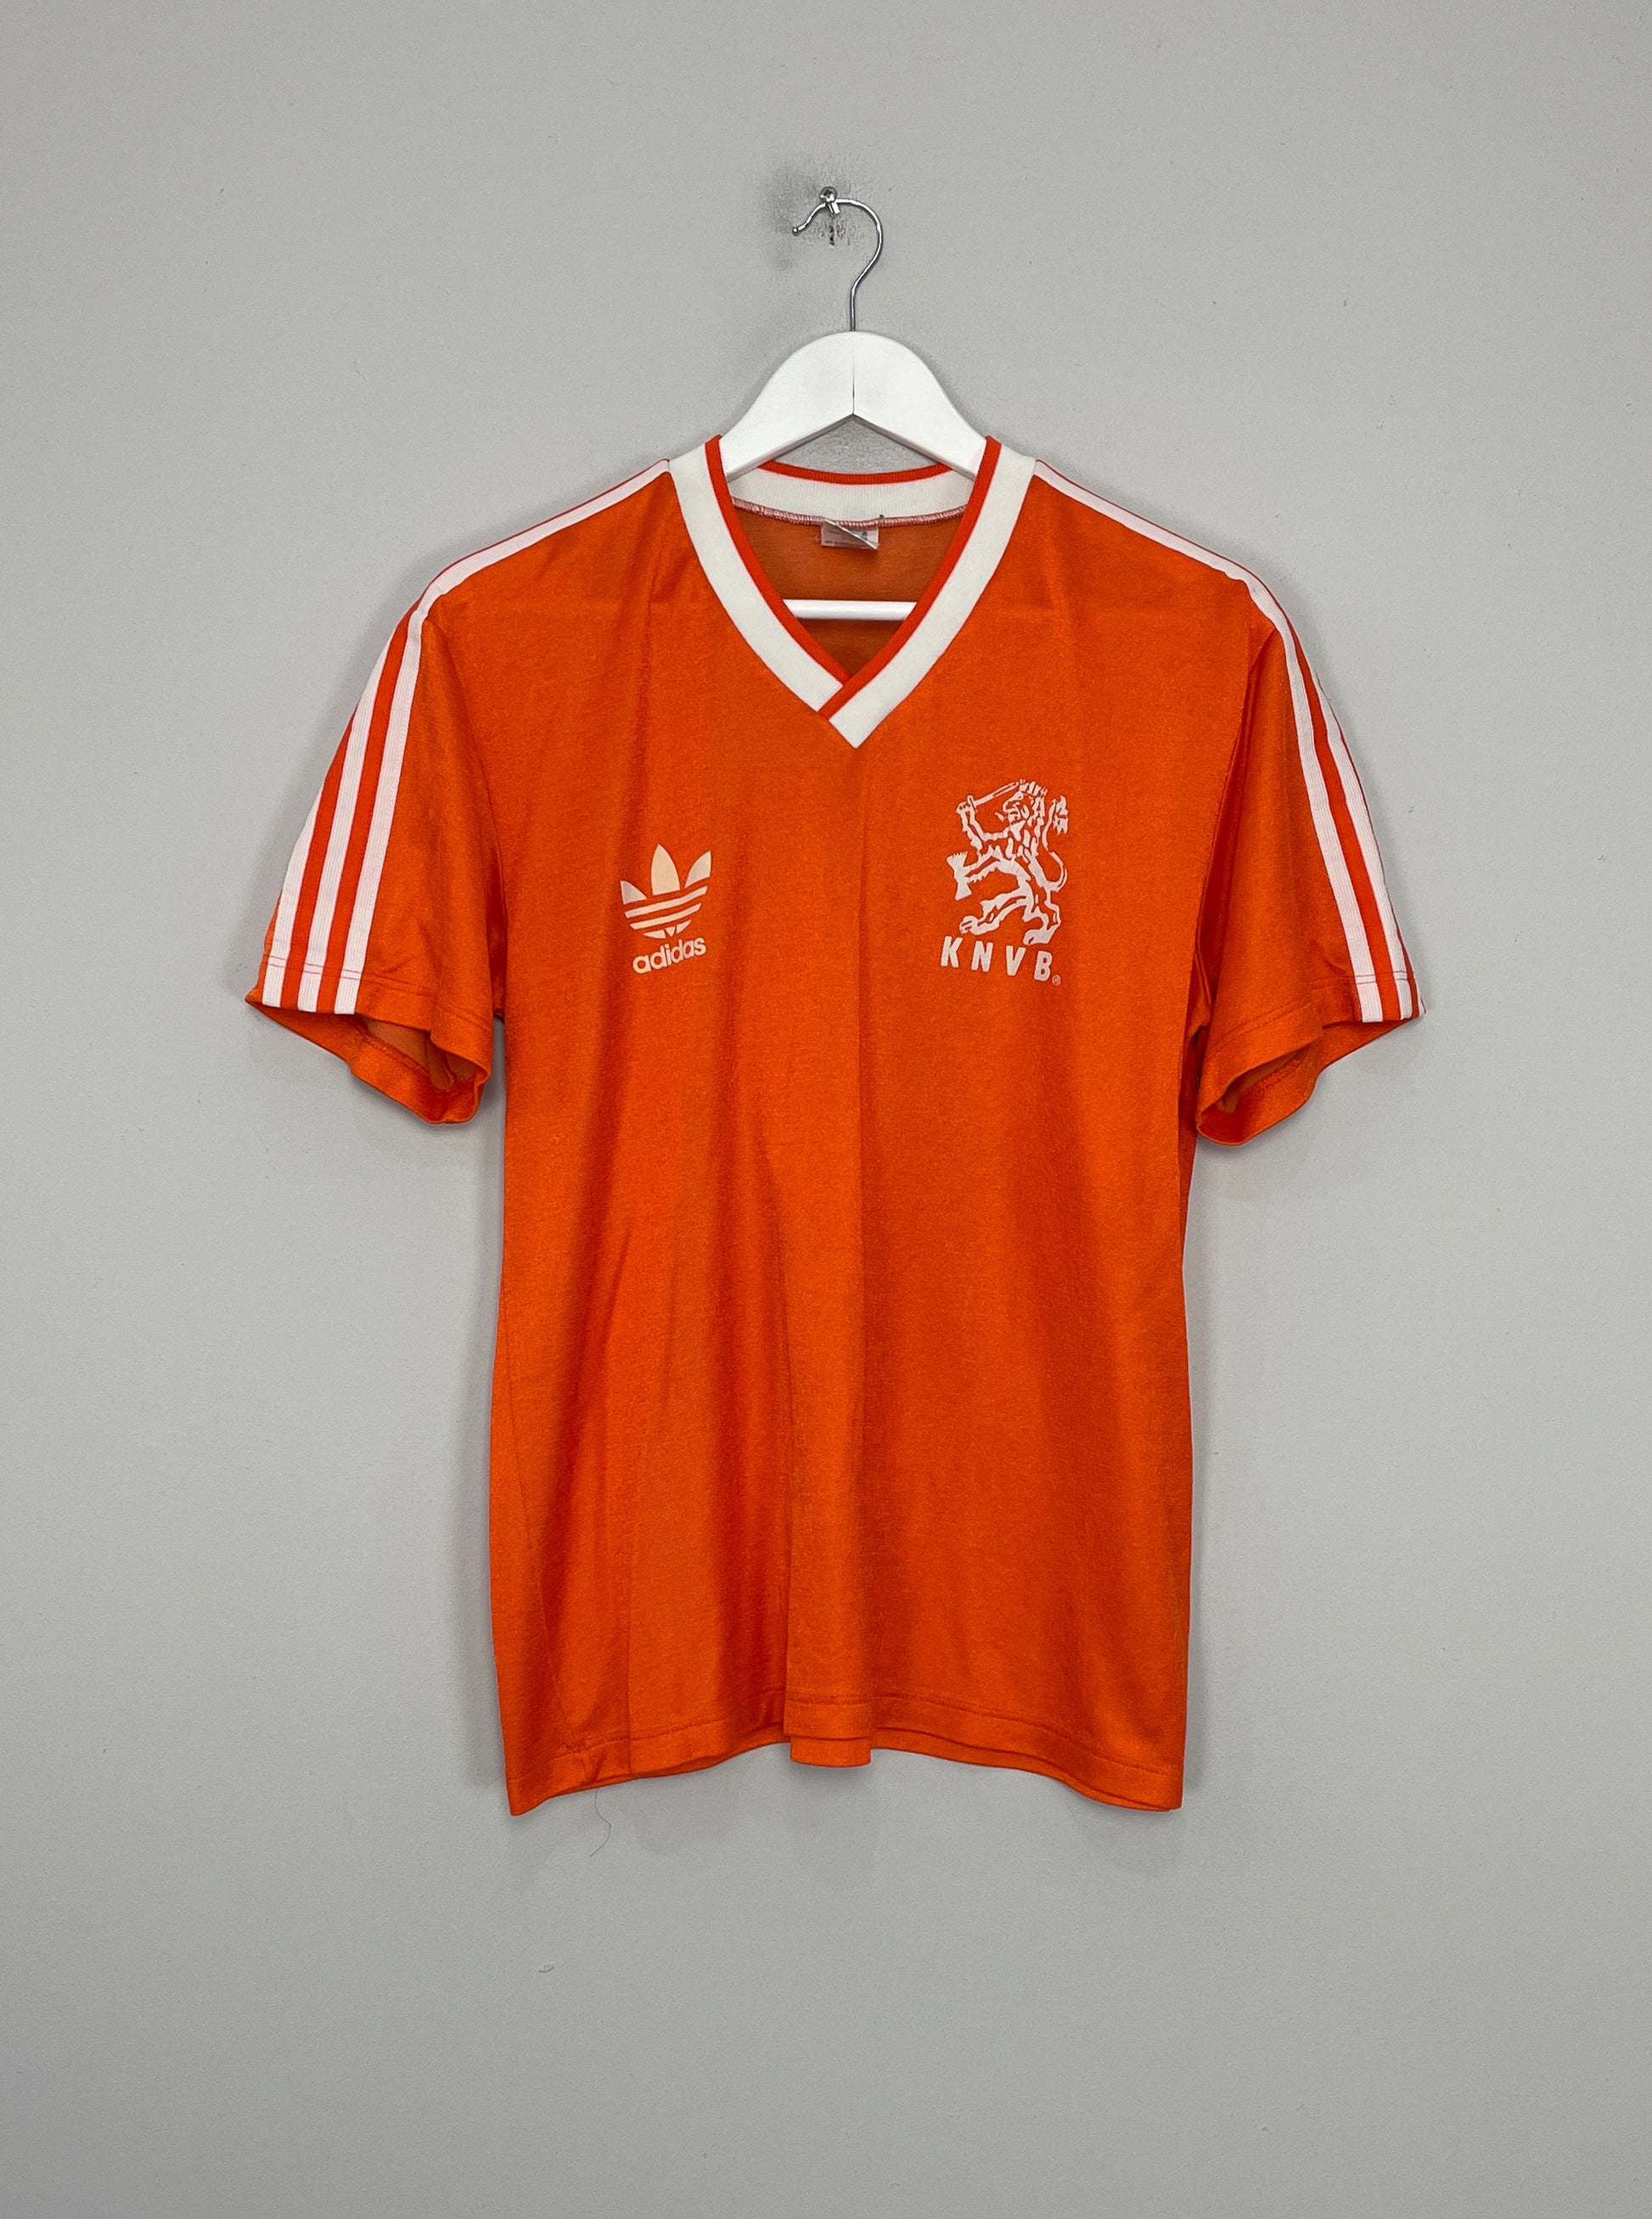 Image of the Netherlands shirt from the 1990/91 season